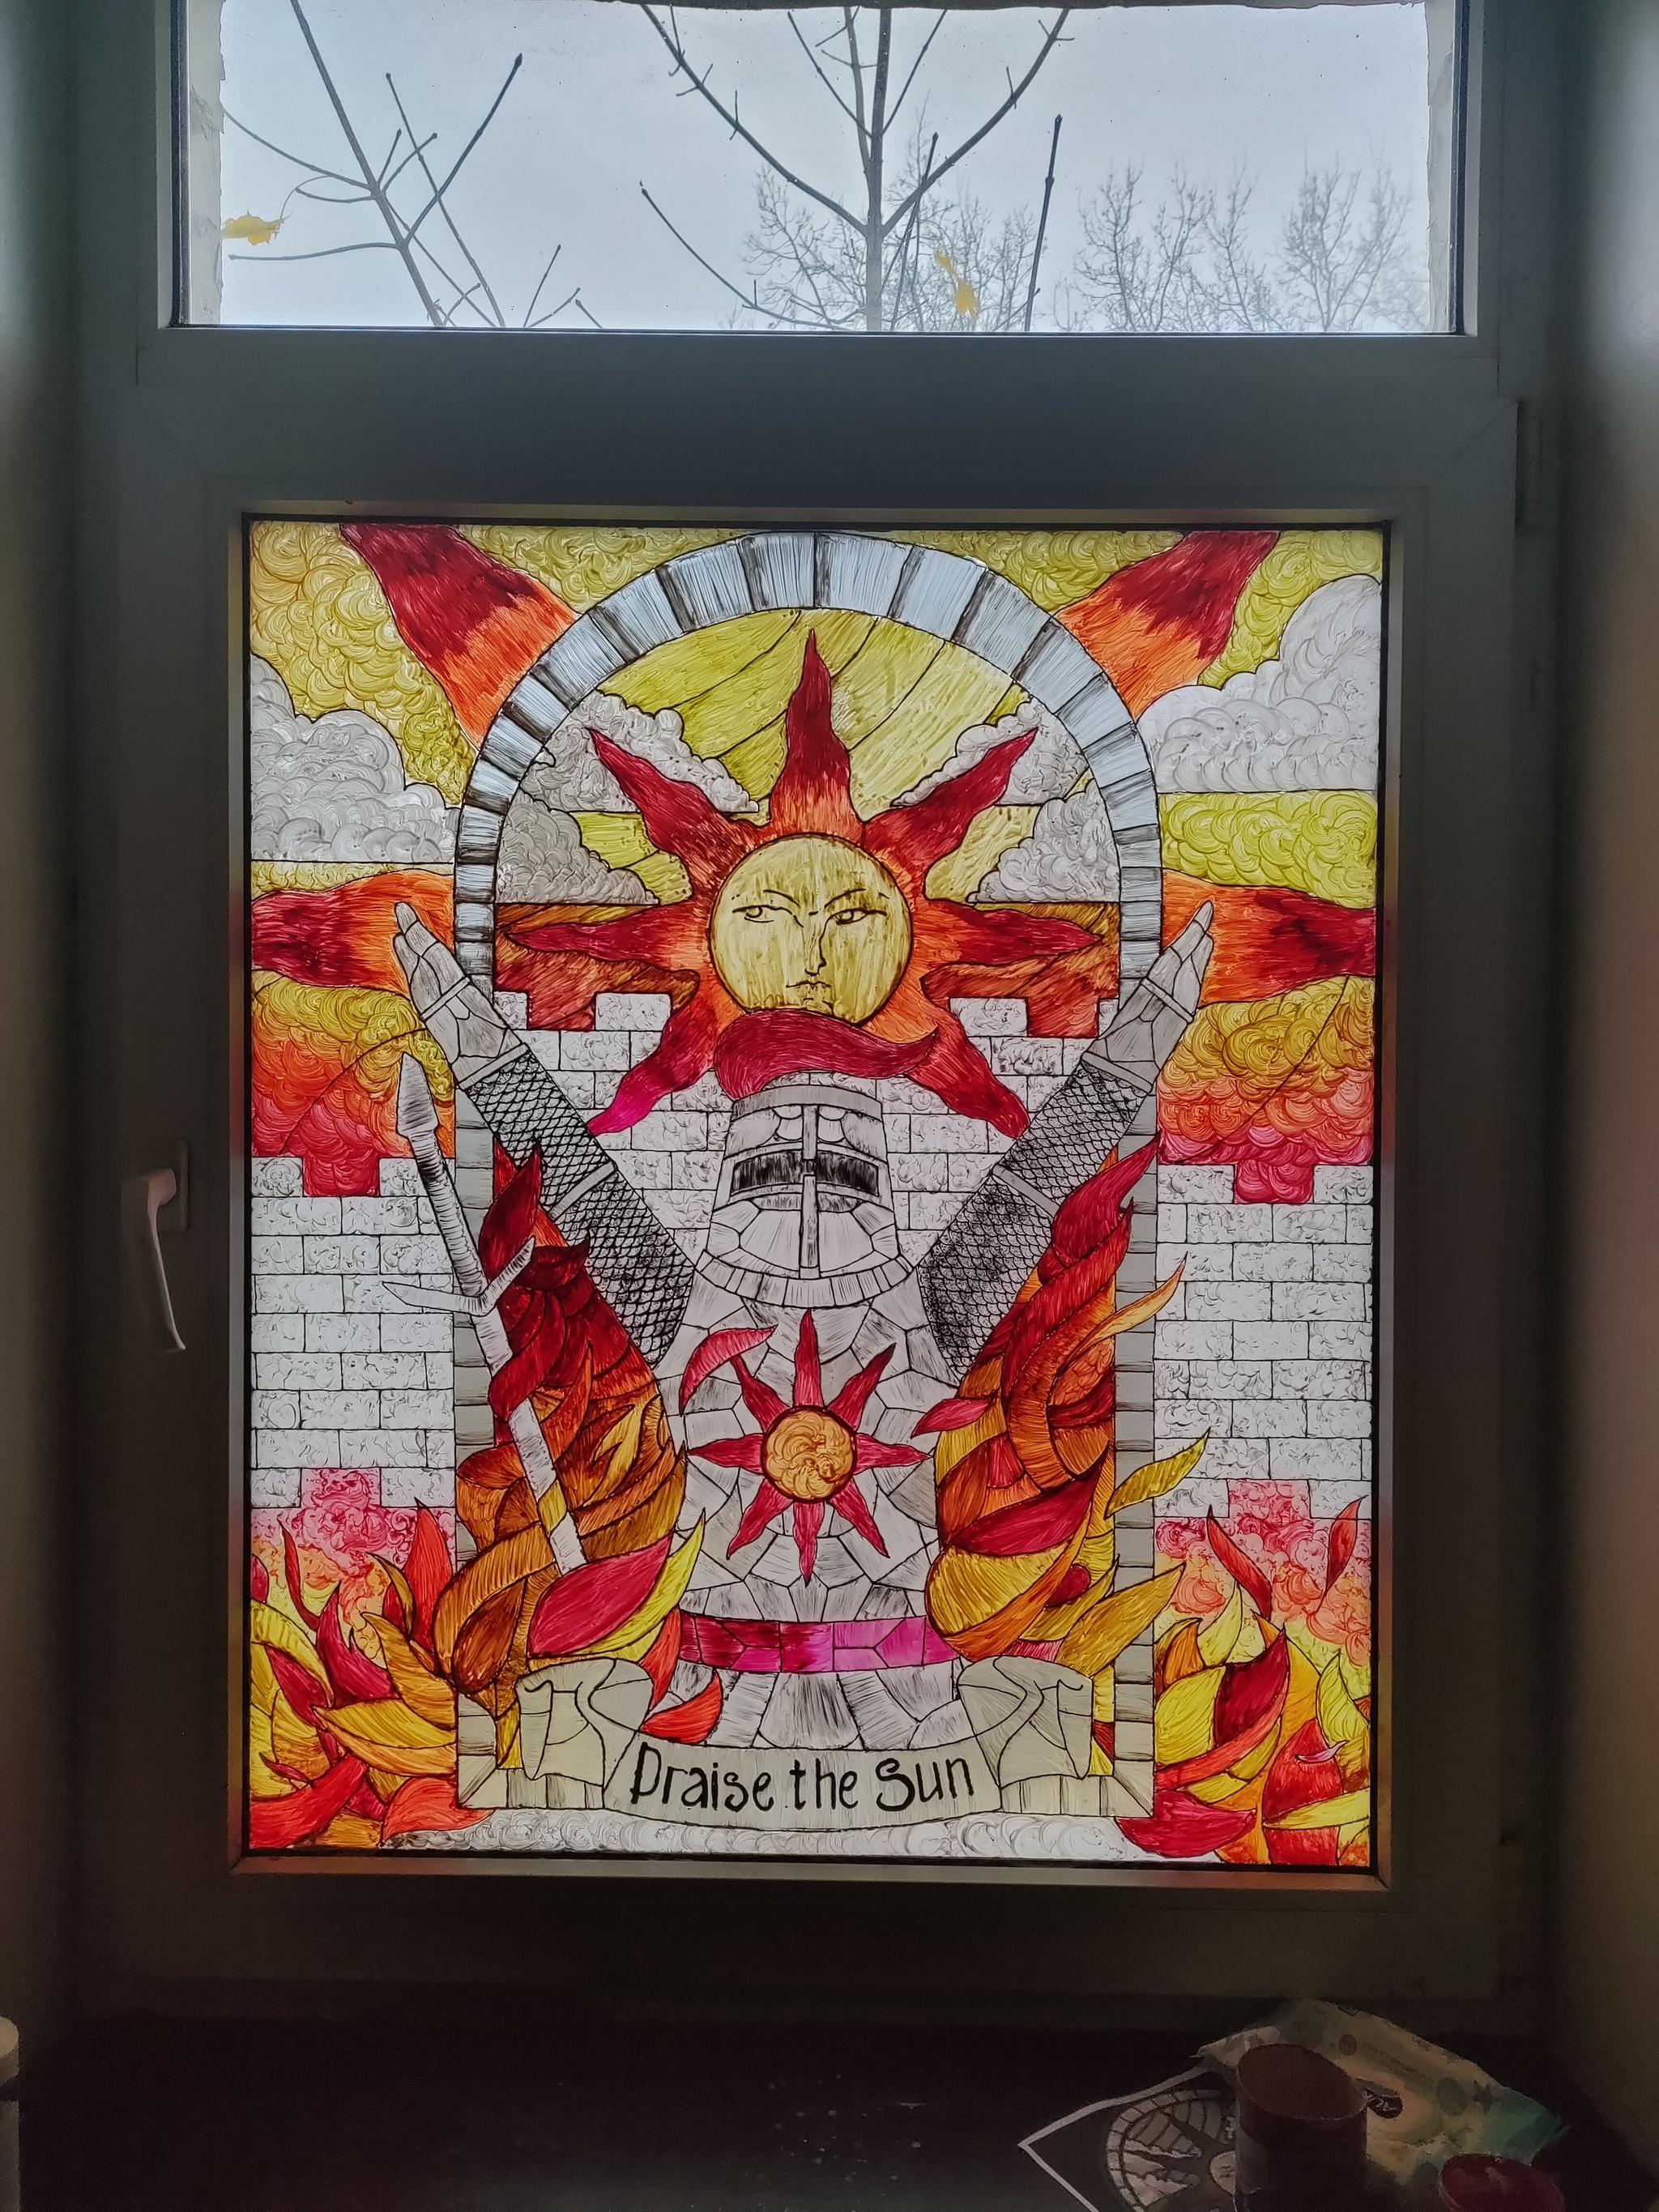 Praise the sun! (almost stained glass) - My, Needlework without process, Stained glass, Praise the sun, Longpost